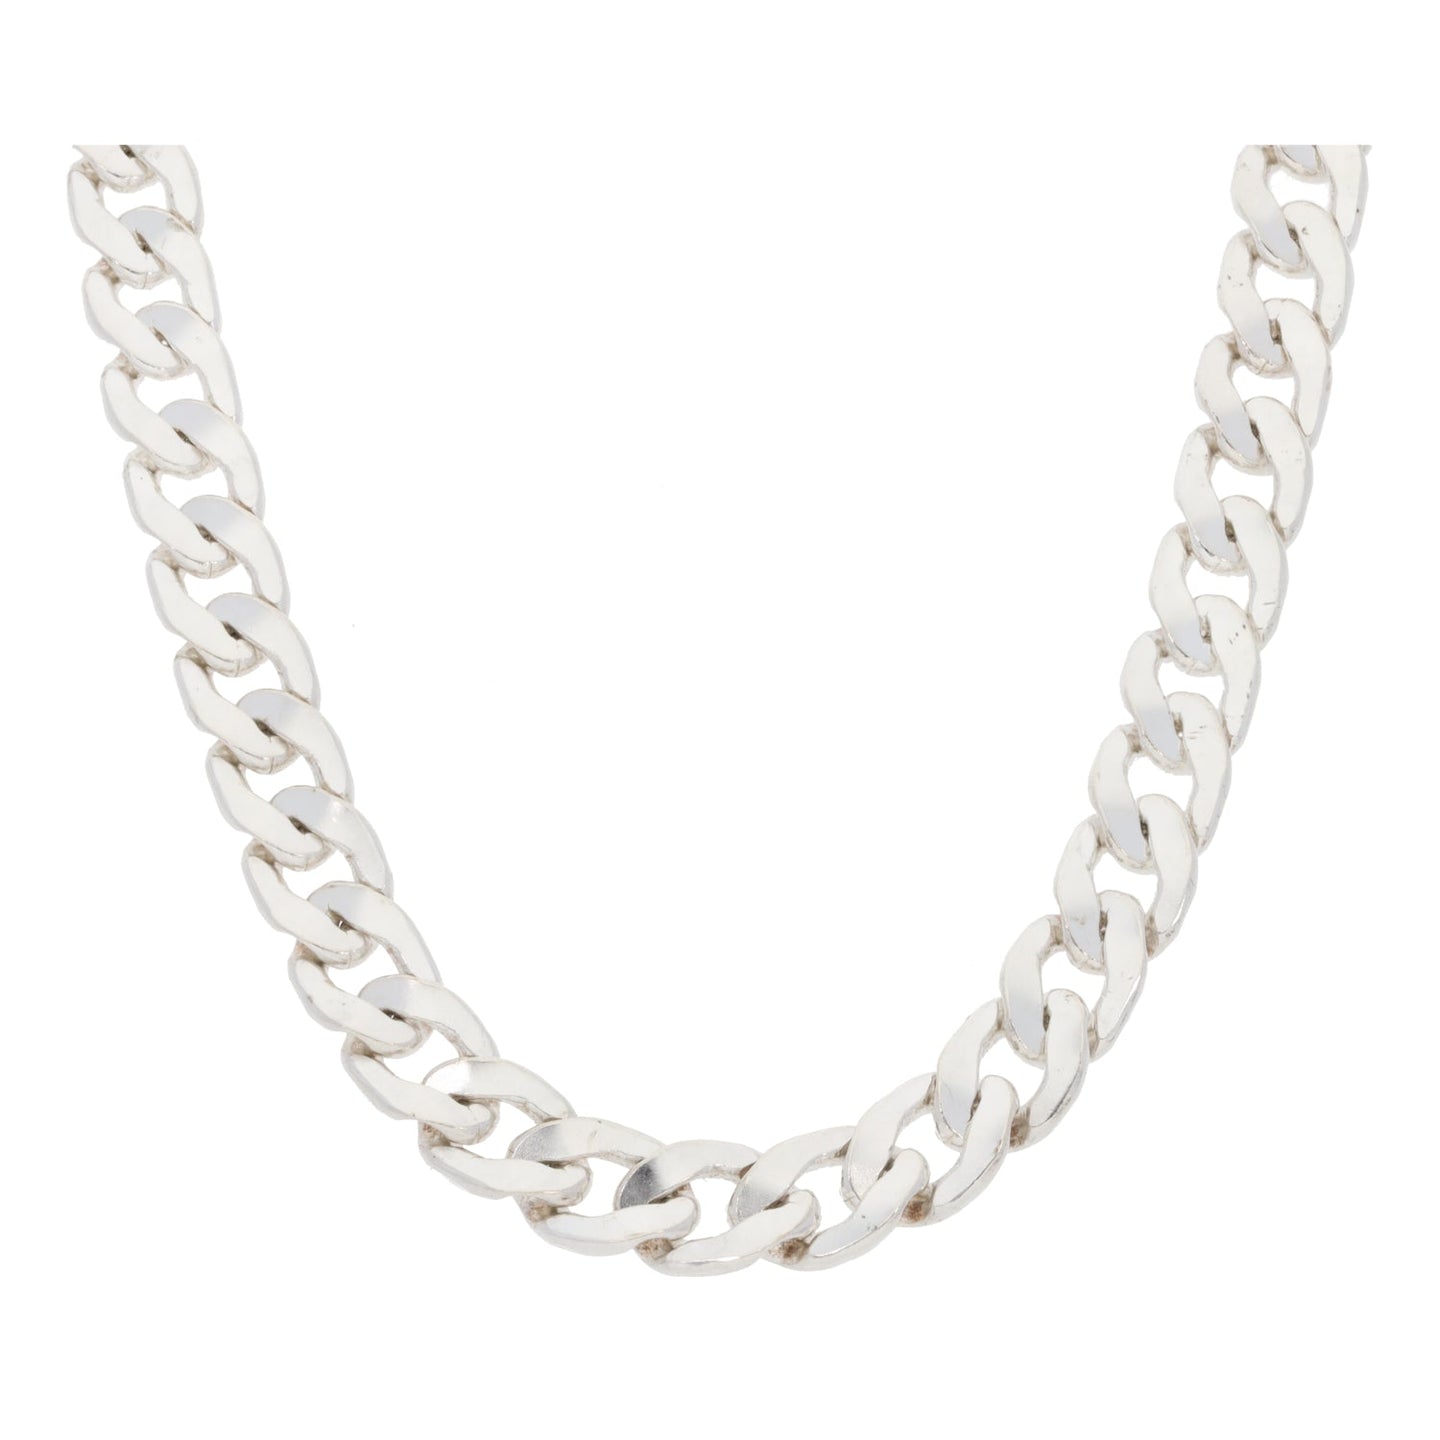 Silver Sterling Curb Chain 16